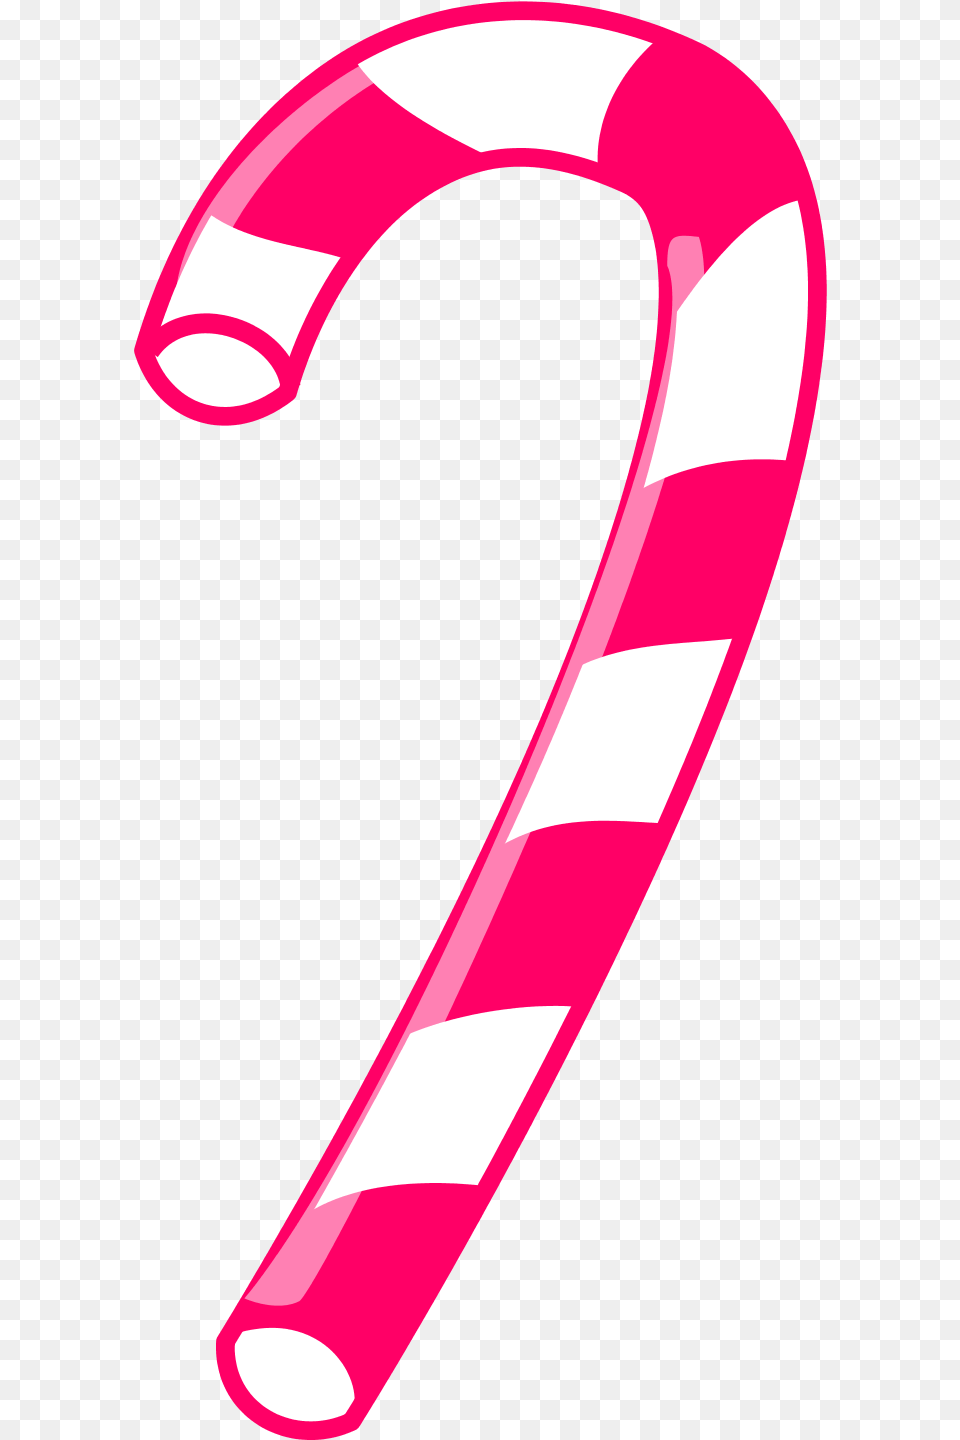 Candy Cane Clipart 10 1600 X 1600 Webcomicmsnet Candy Clip Art, Food, Sweets, Stick, Dynamite Png